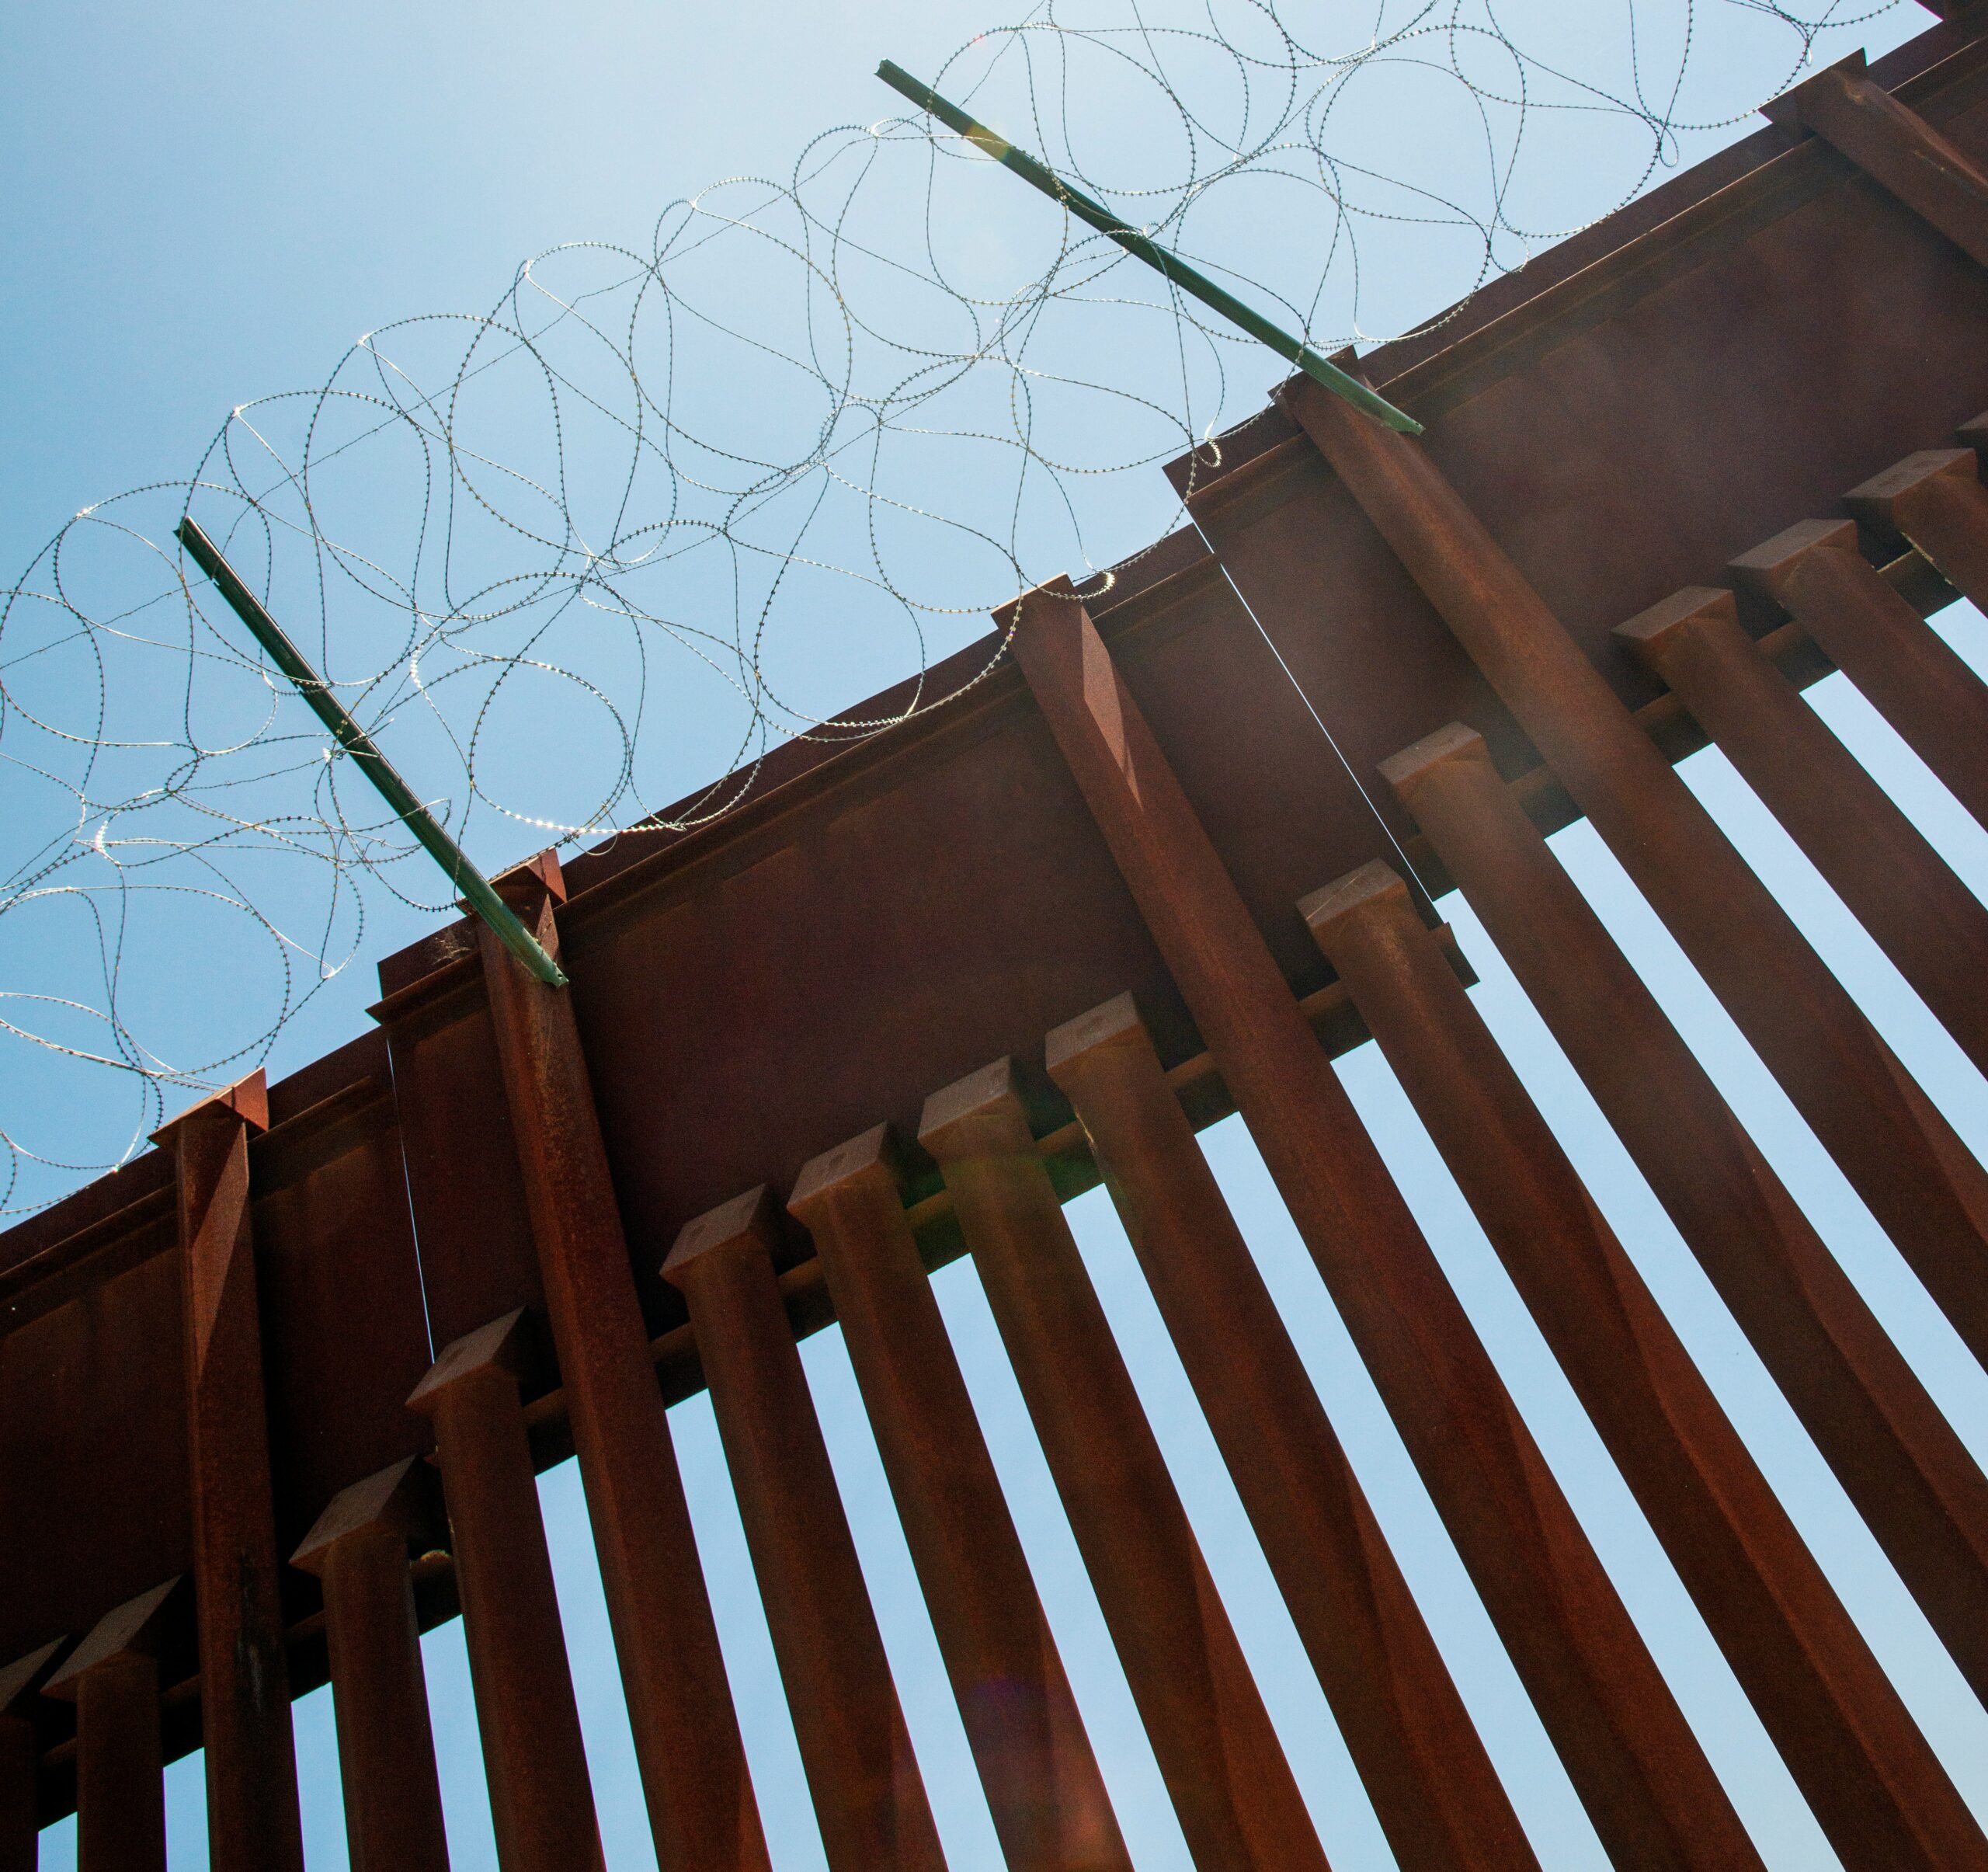 A metal wall is shown with chicken wire at the top. A blue sky is also in view.